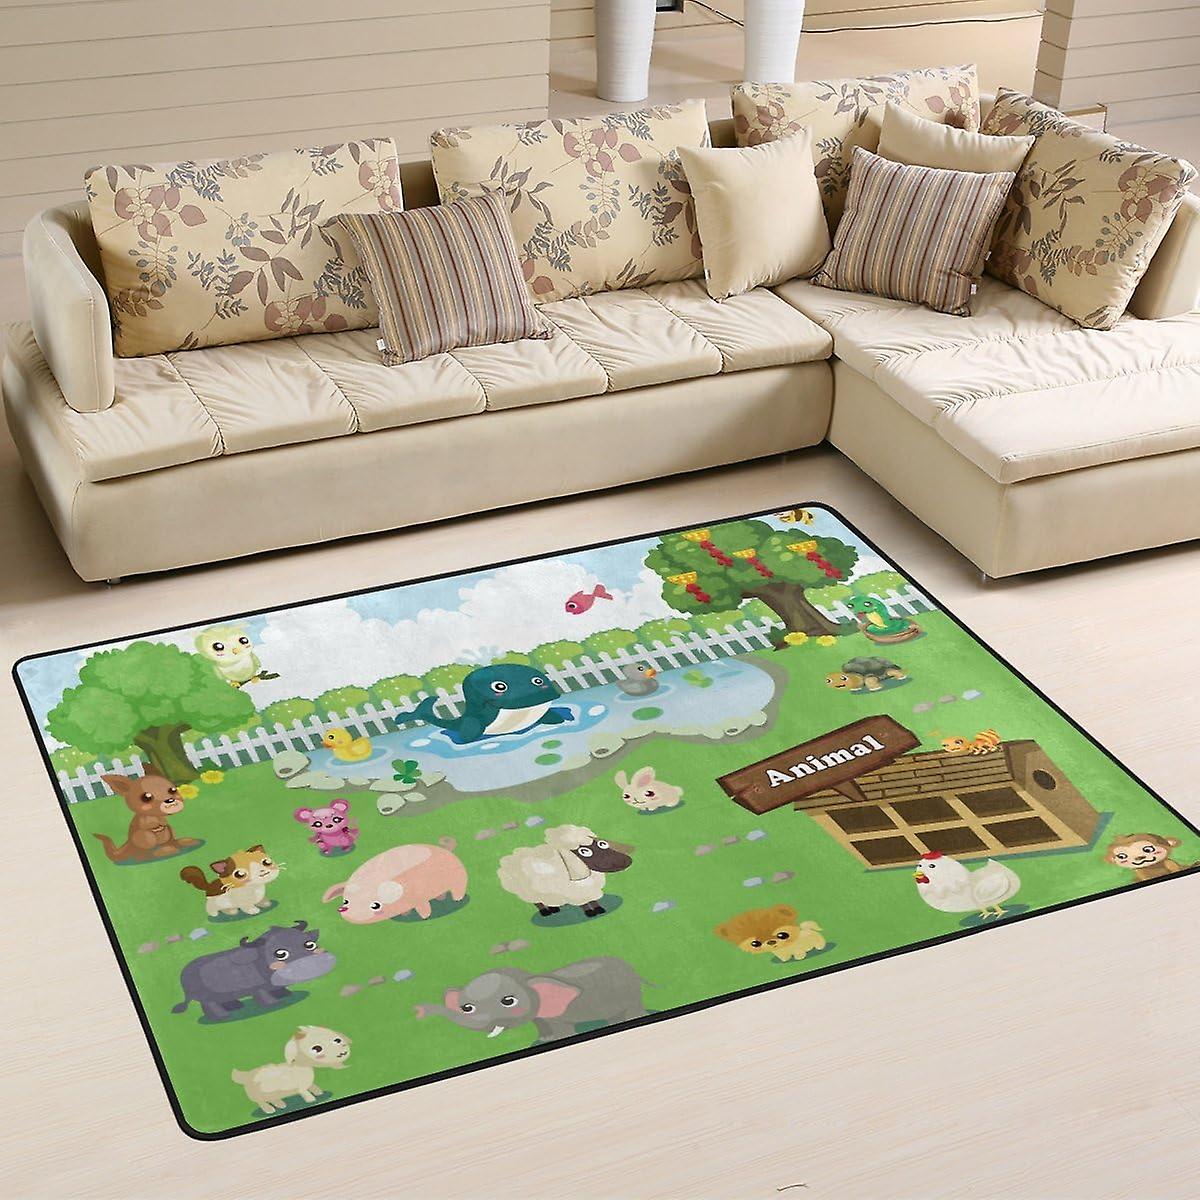 Colourlife Cute Wild Farm Animals Lightweight Carpet Mats Area Soft Rugs Floor Mat Doormat Decoration For Rooms Entrance 36 X 24 Inches